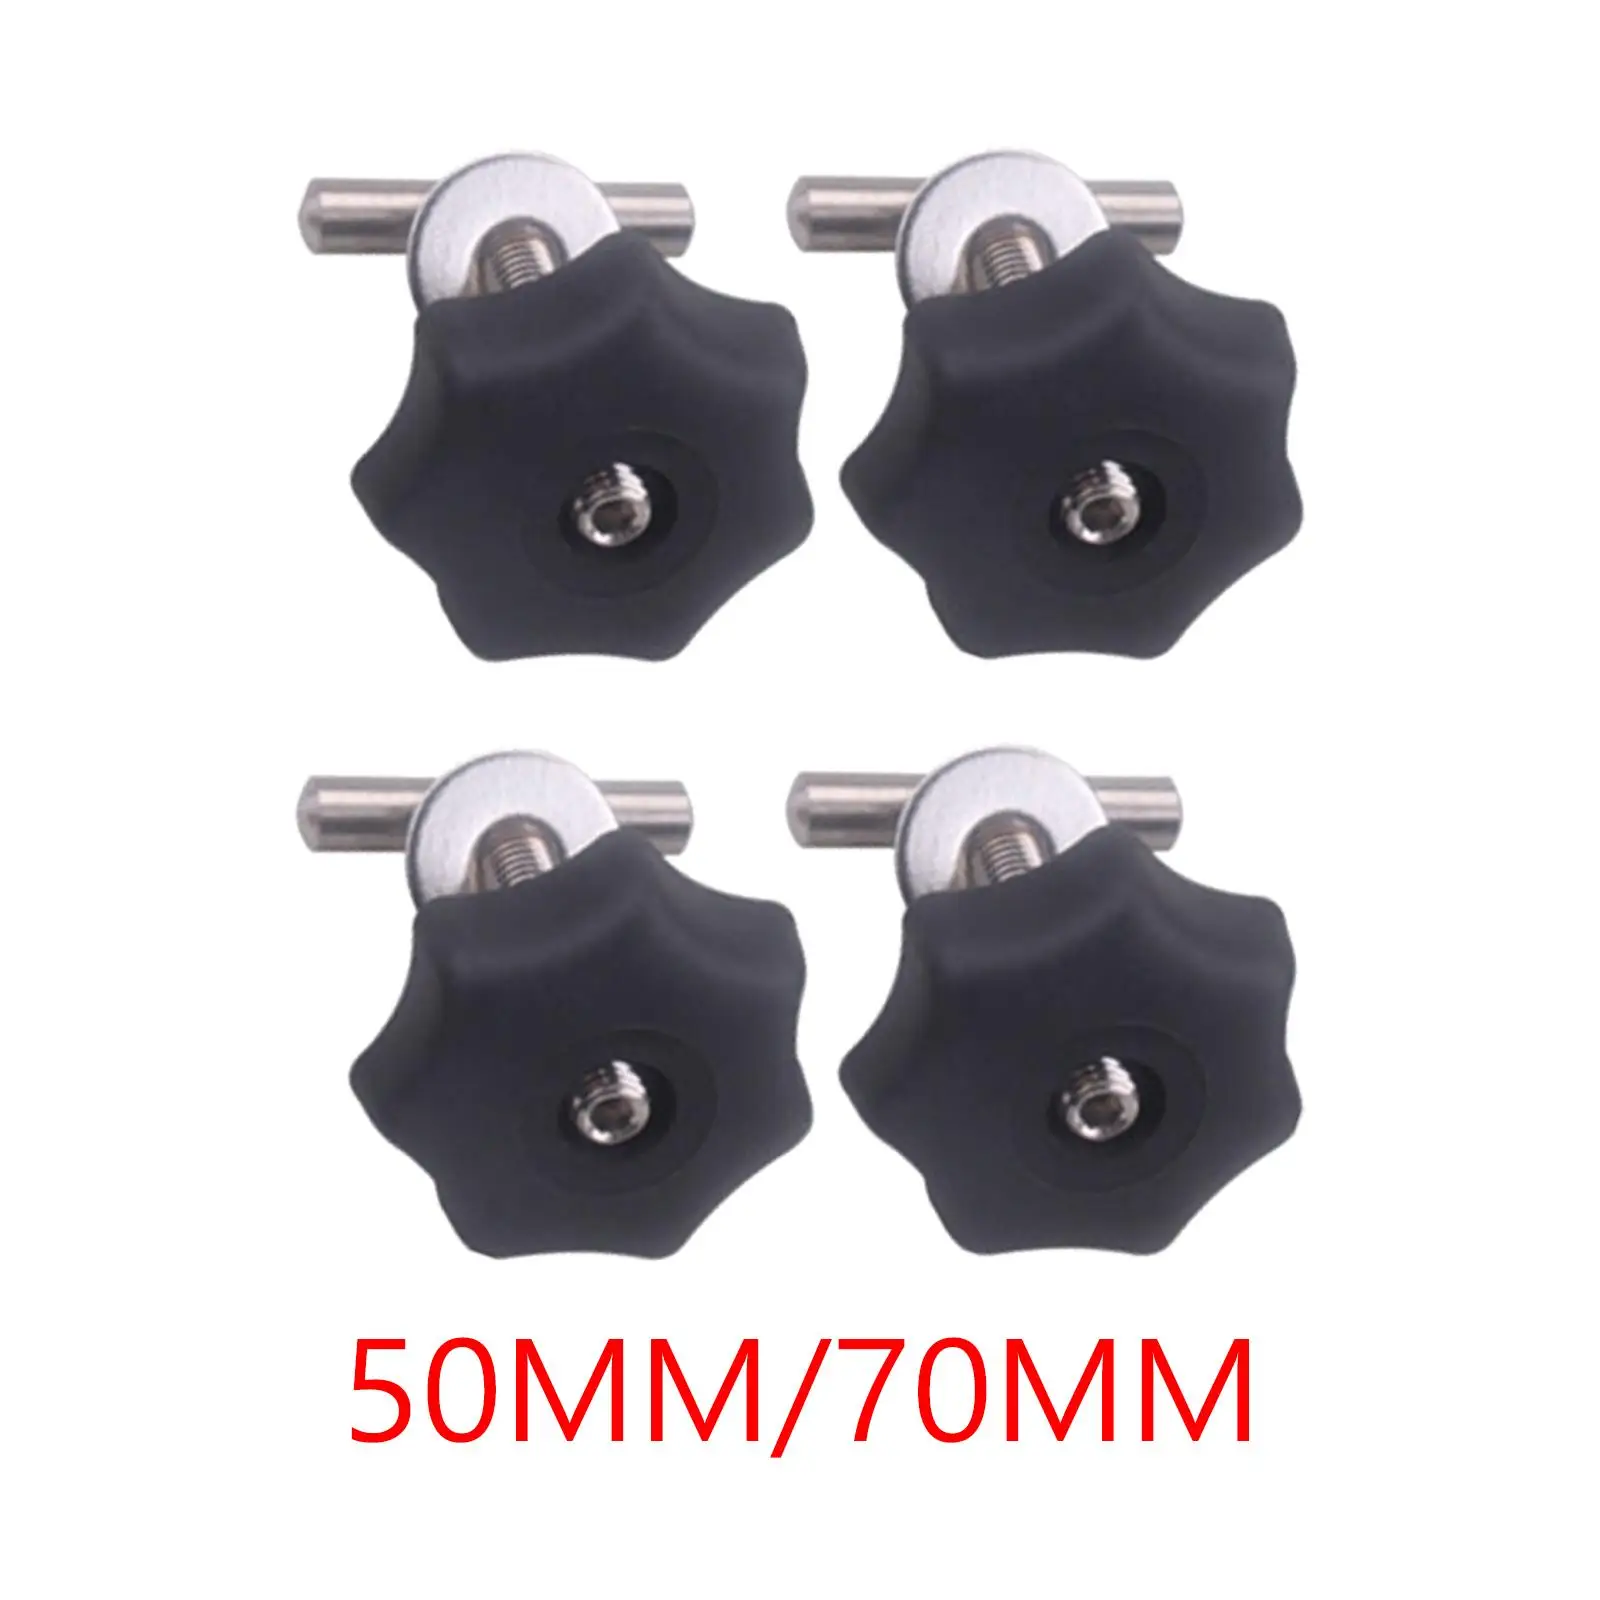 

4x 50mm/70mm Nut Set Car Supplies Stable Steel Mounting Accessories Locking Rail Screws for VW T5 T6 Replacement Refitting